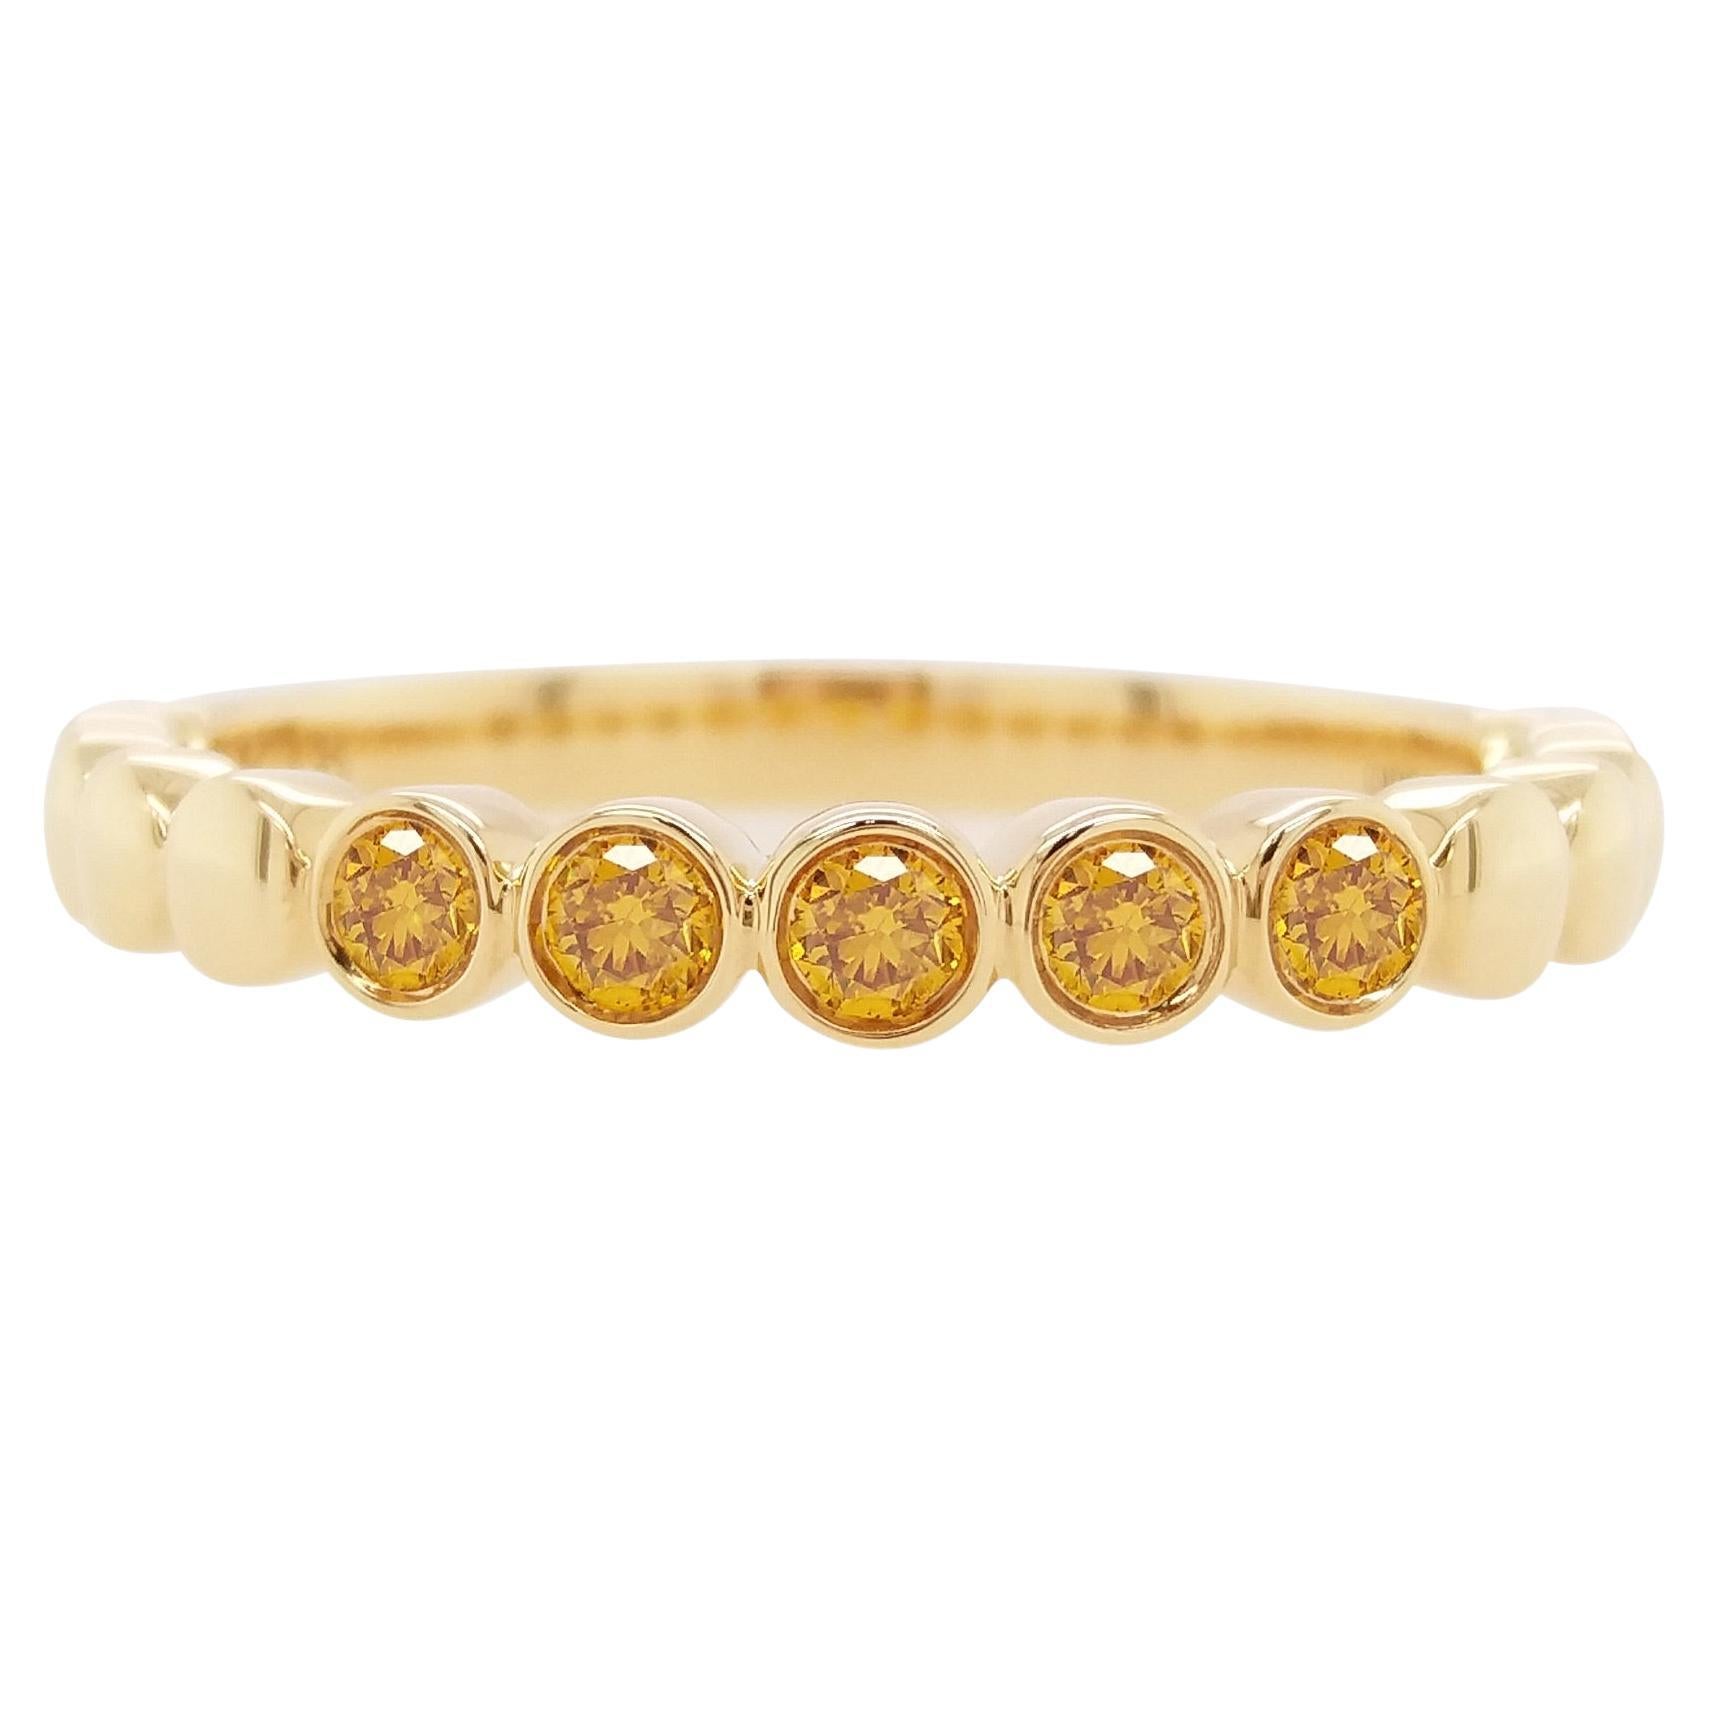 Rare Brilliant-Cut Yellow Diamond Band Ring made in 18K Gold For Sale